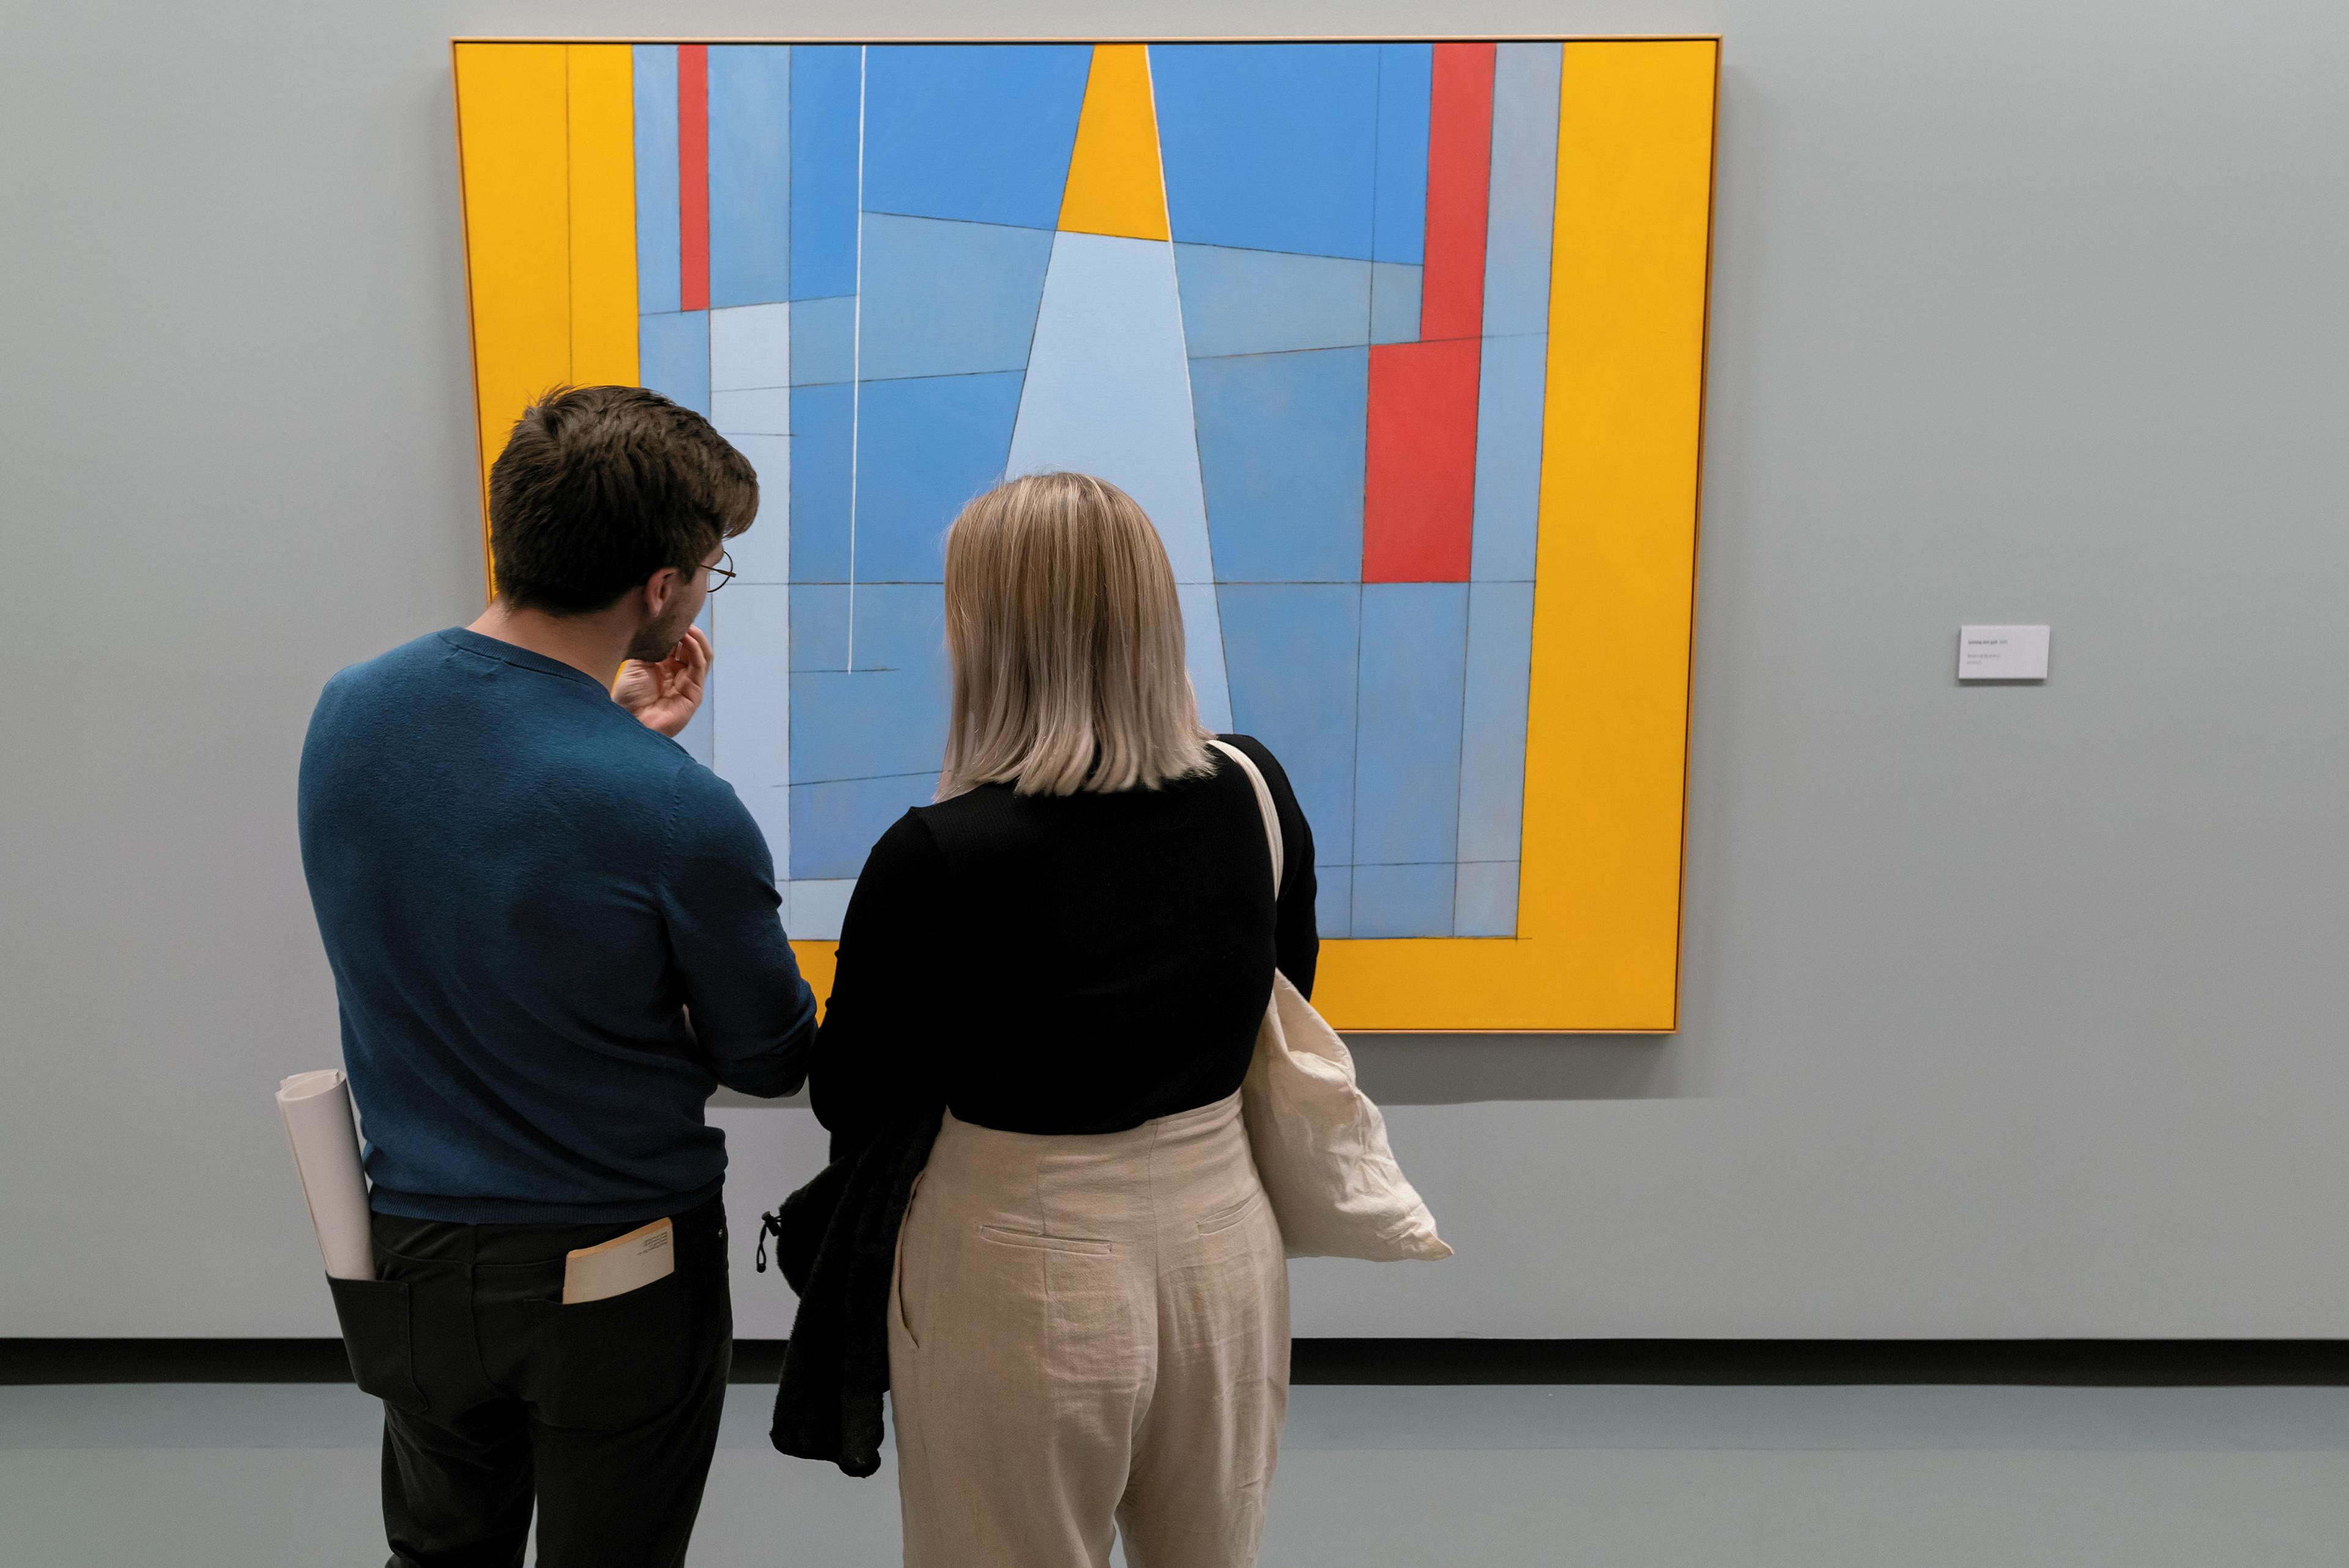 Two people in front of a colorful painting in the Lysverket museum